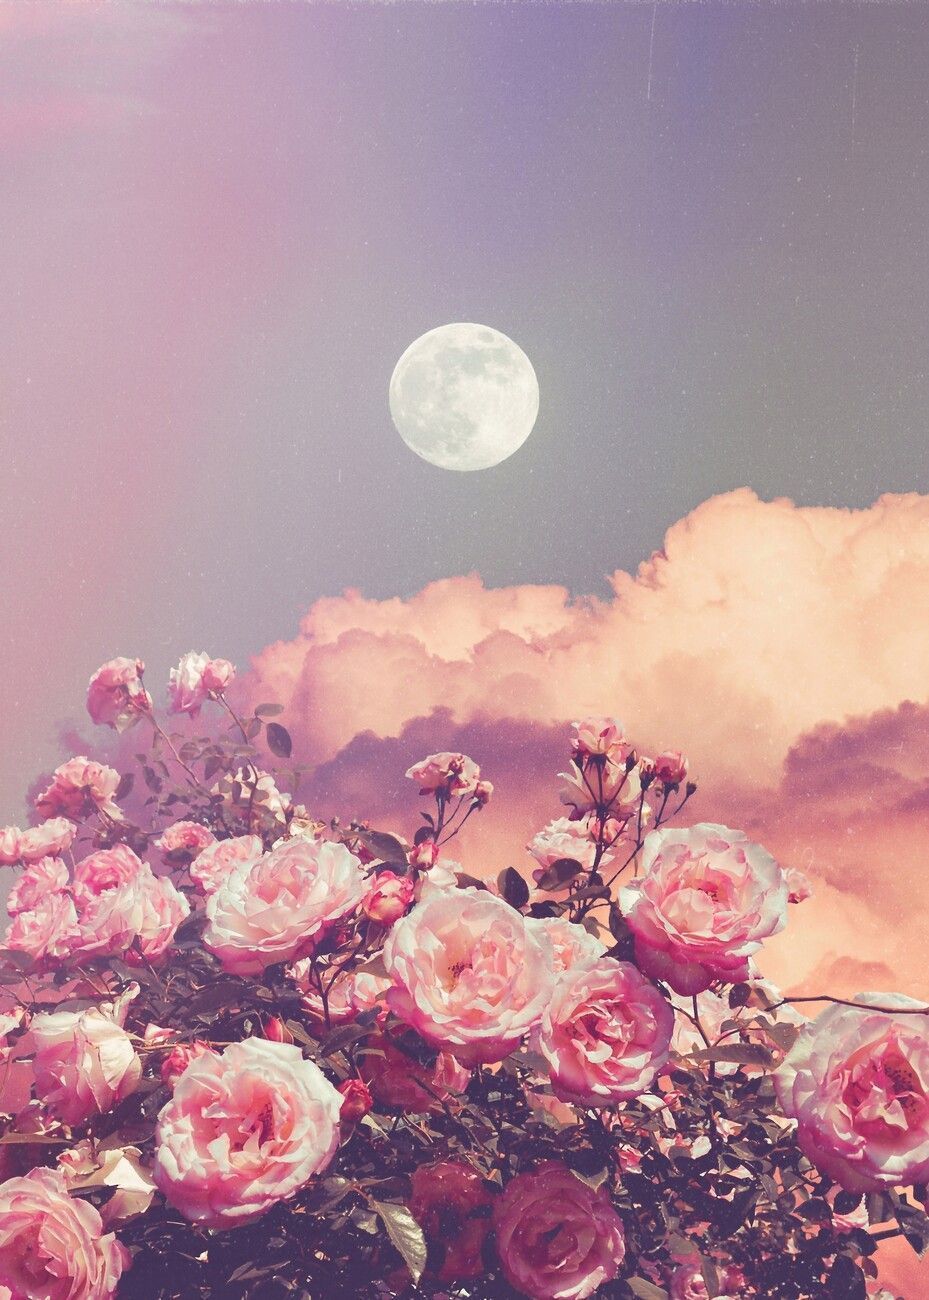 Aesthetic Rose Clouds and Full Moon. Posters, Impressions artistiques, Décoration murale